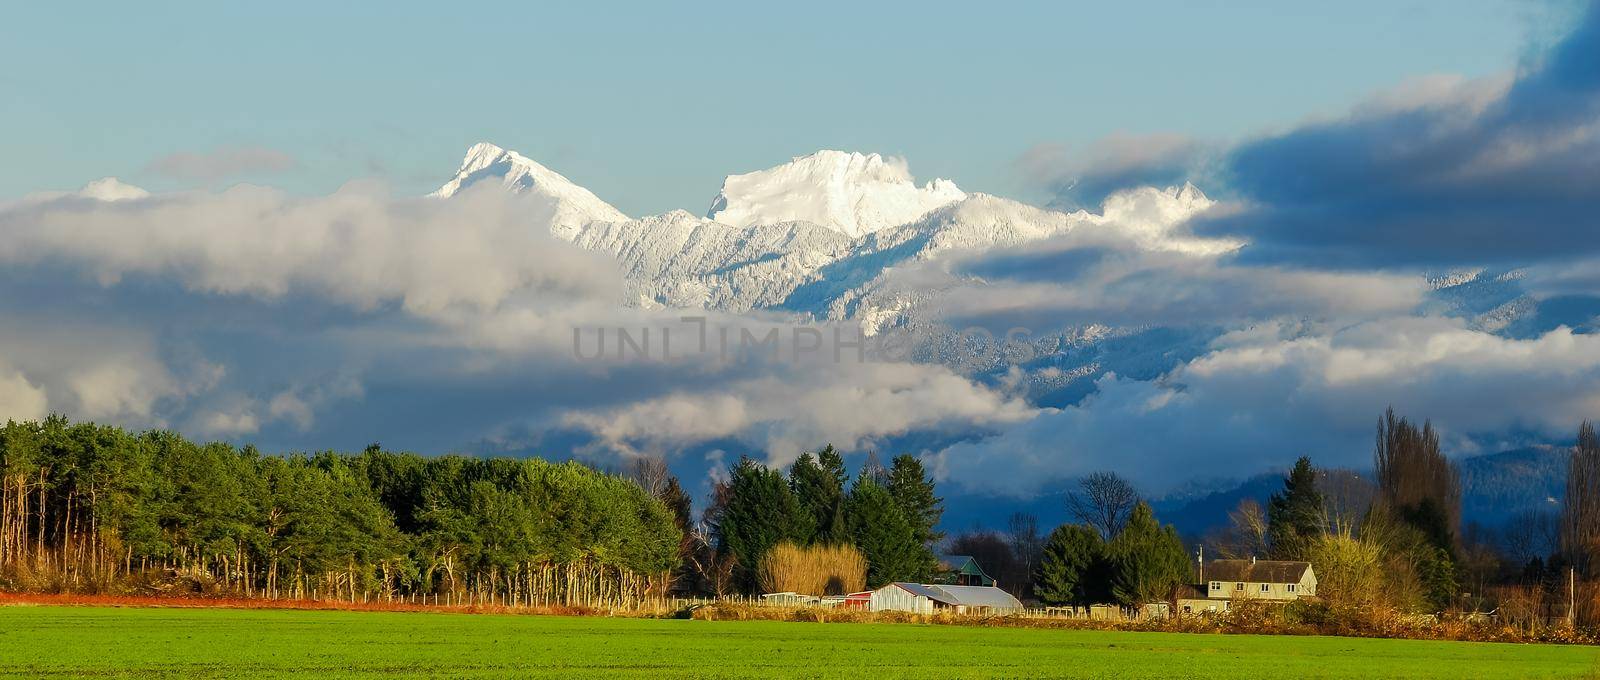 Pastoral overview over Fraser valley farm lands on snowy mountains background.